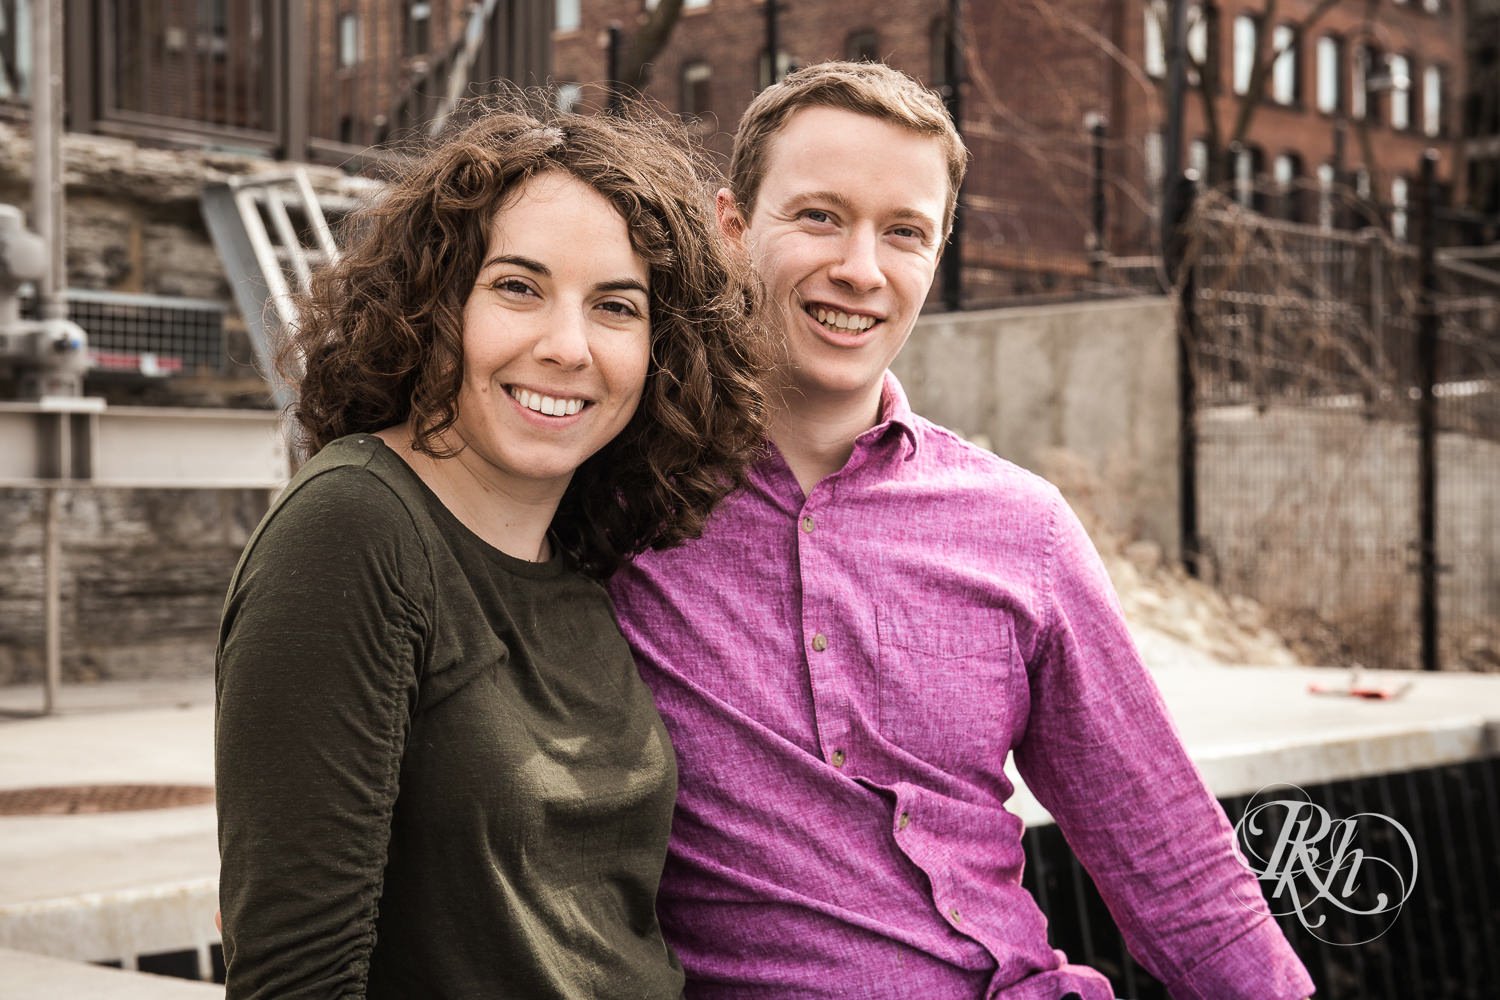 Man and woman smile during winter engagement photography in Minneapolis, Minnesota during St. Anthony Main engagement photos.